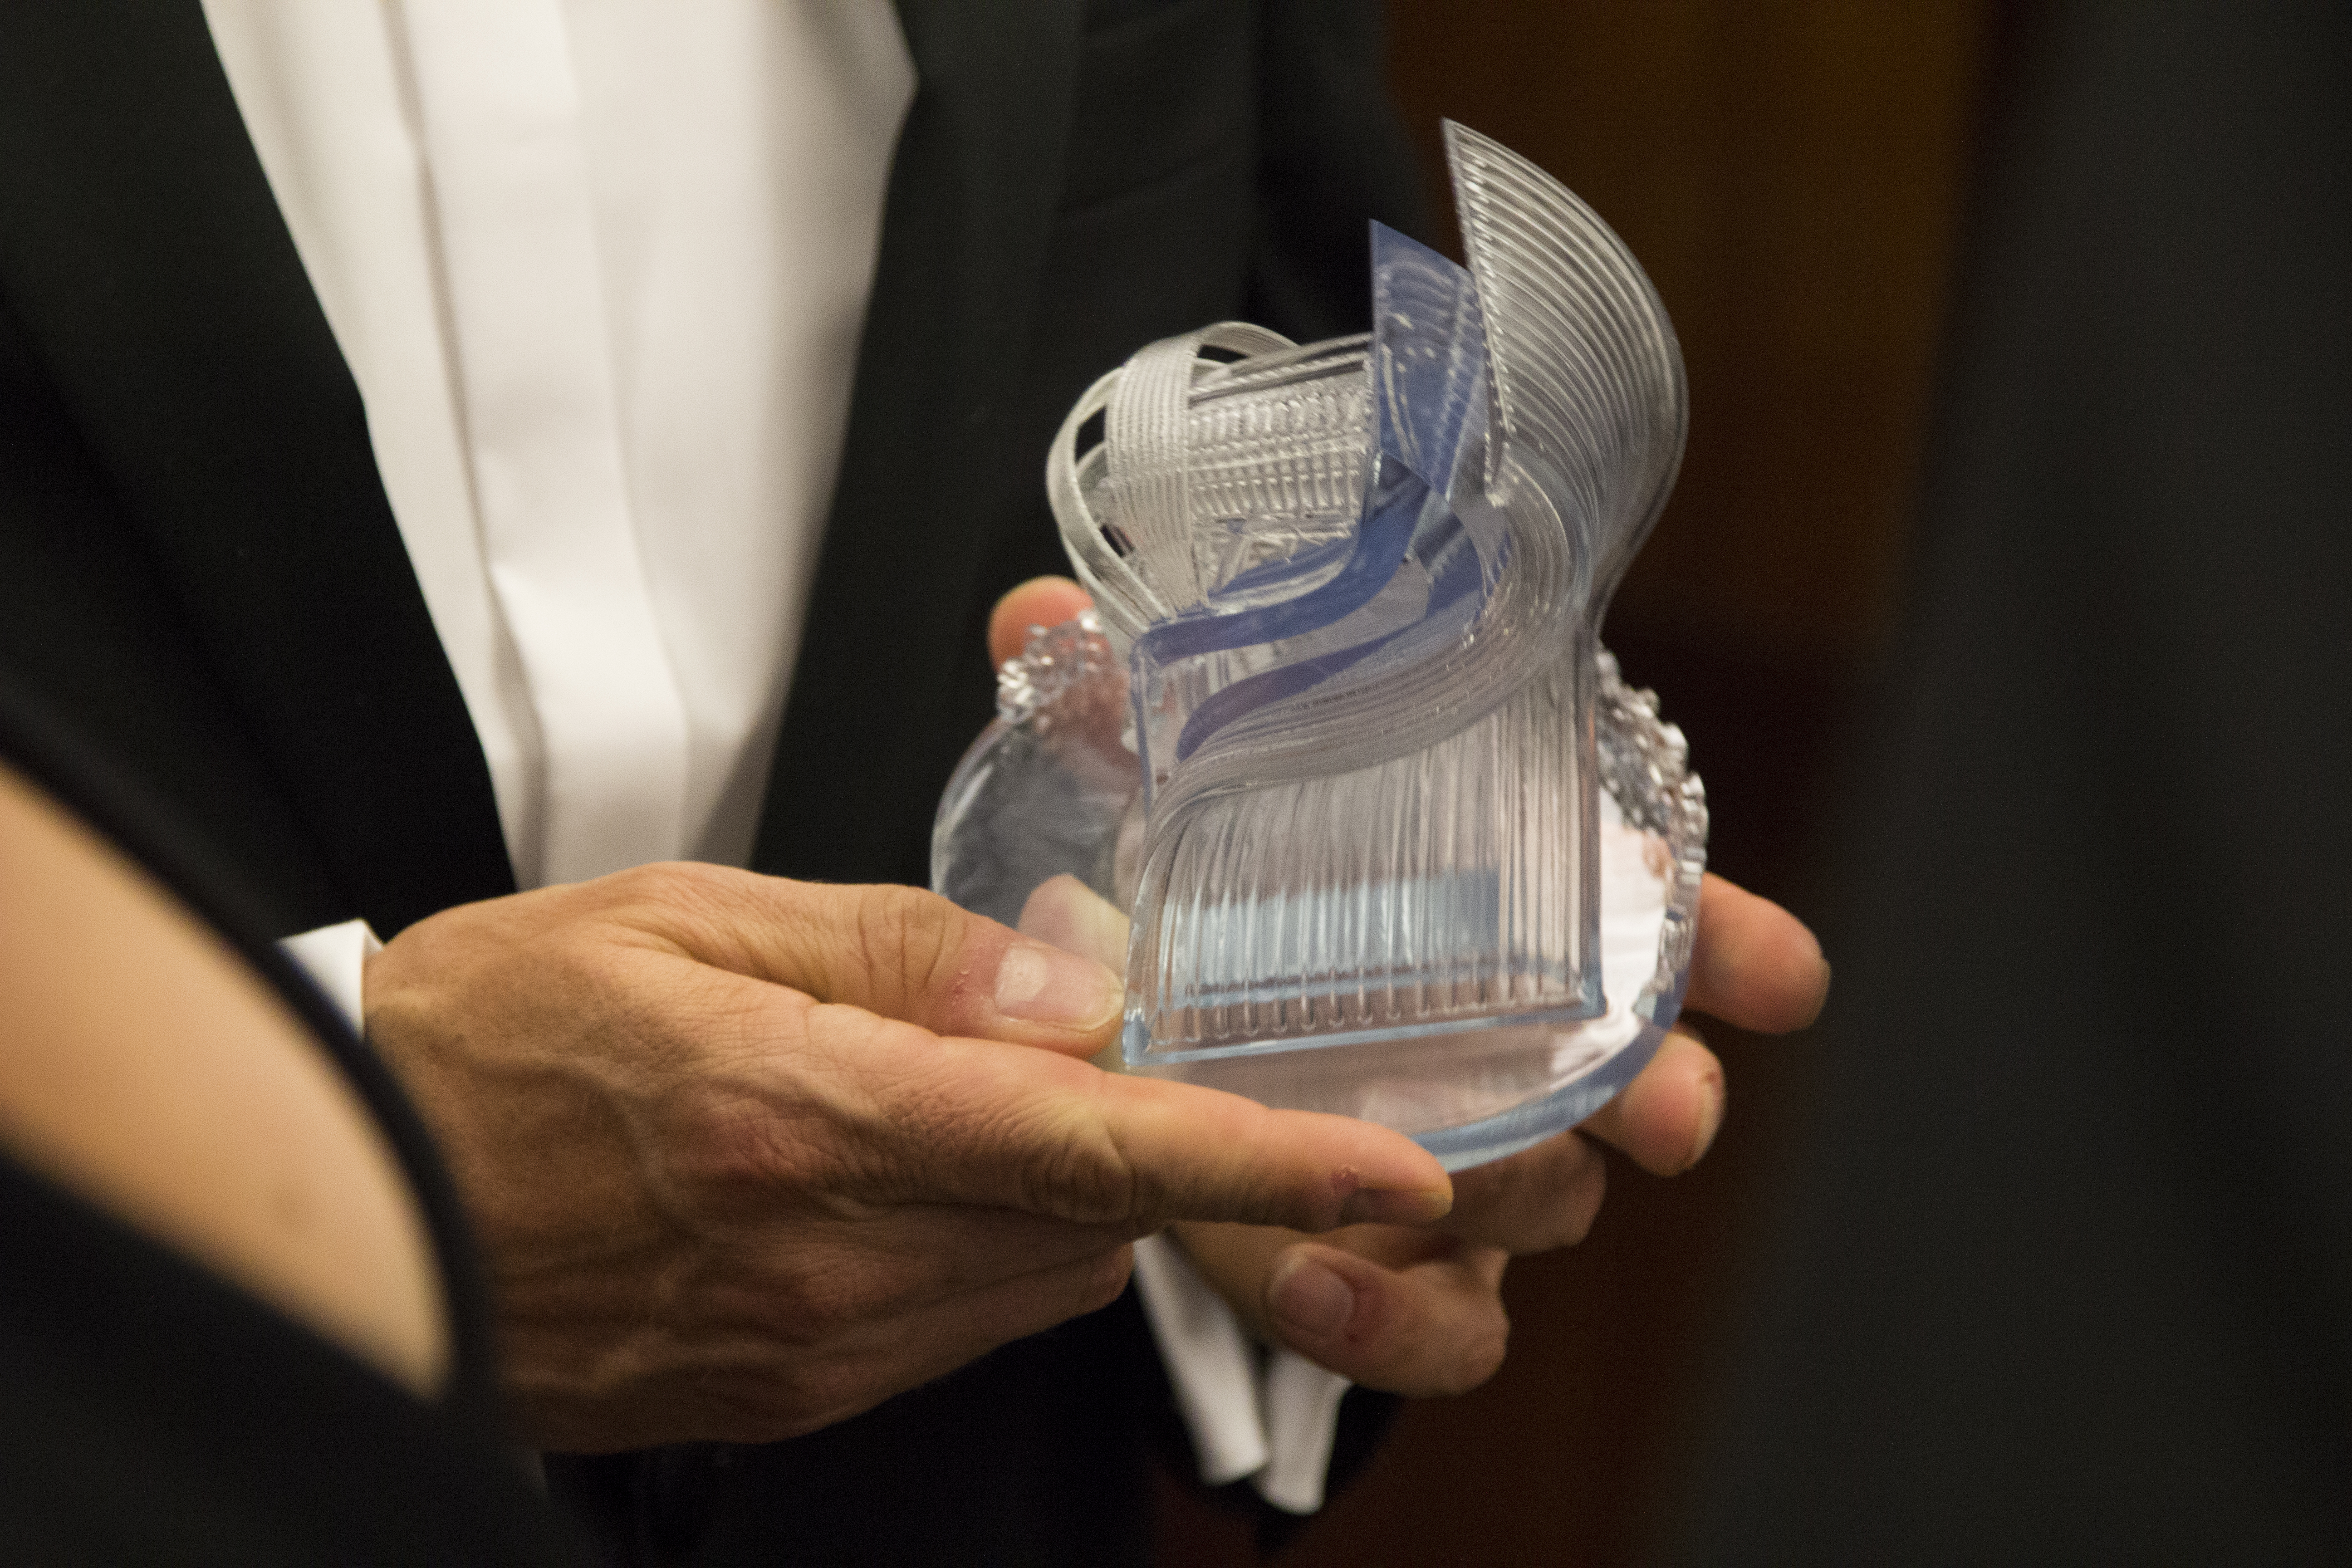 The 2018 3D Printing Industry Awards trophy in the hands of one of last year's winners.